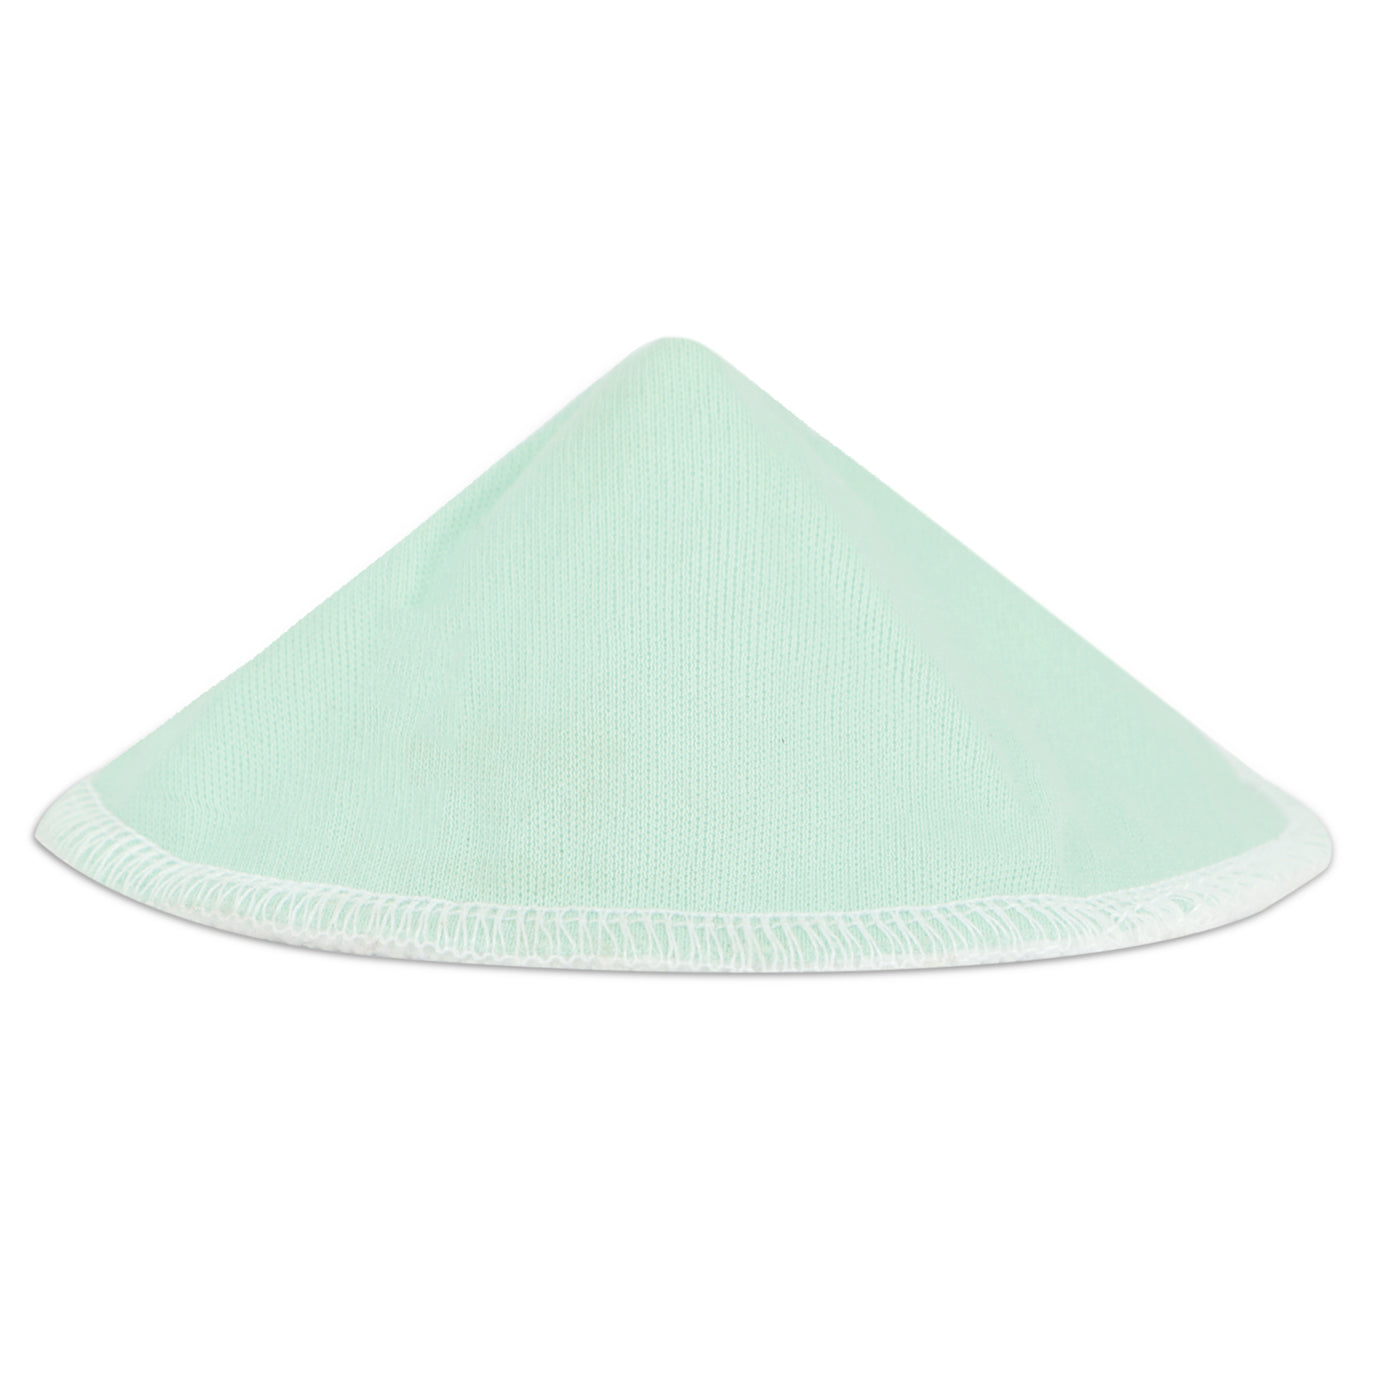 Improvus Famous Reusable, Washable Nursing Breast Pad Pack Of 2